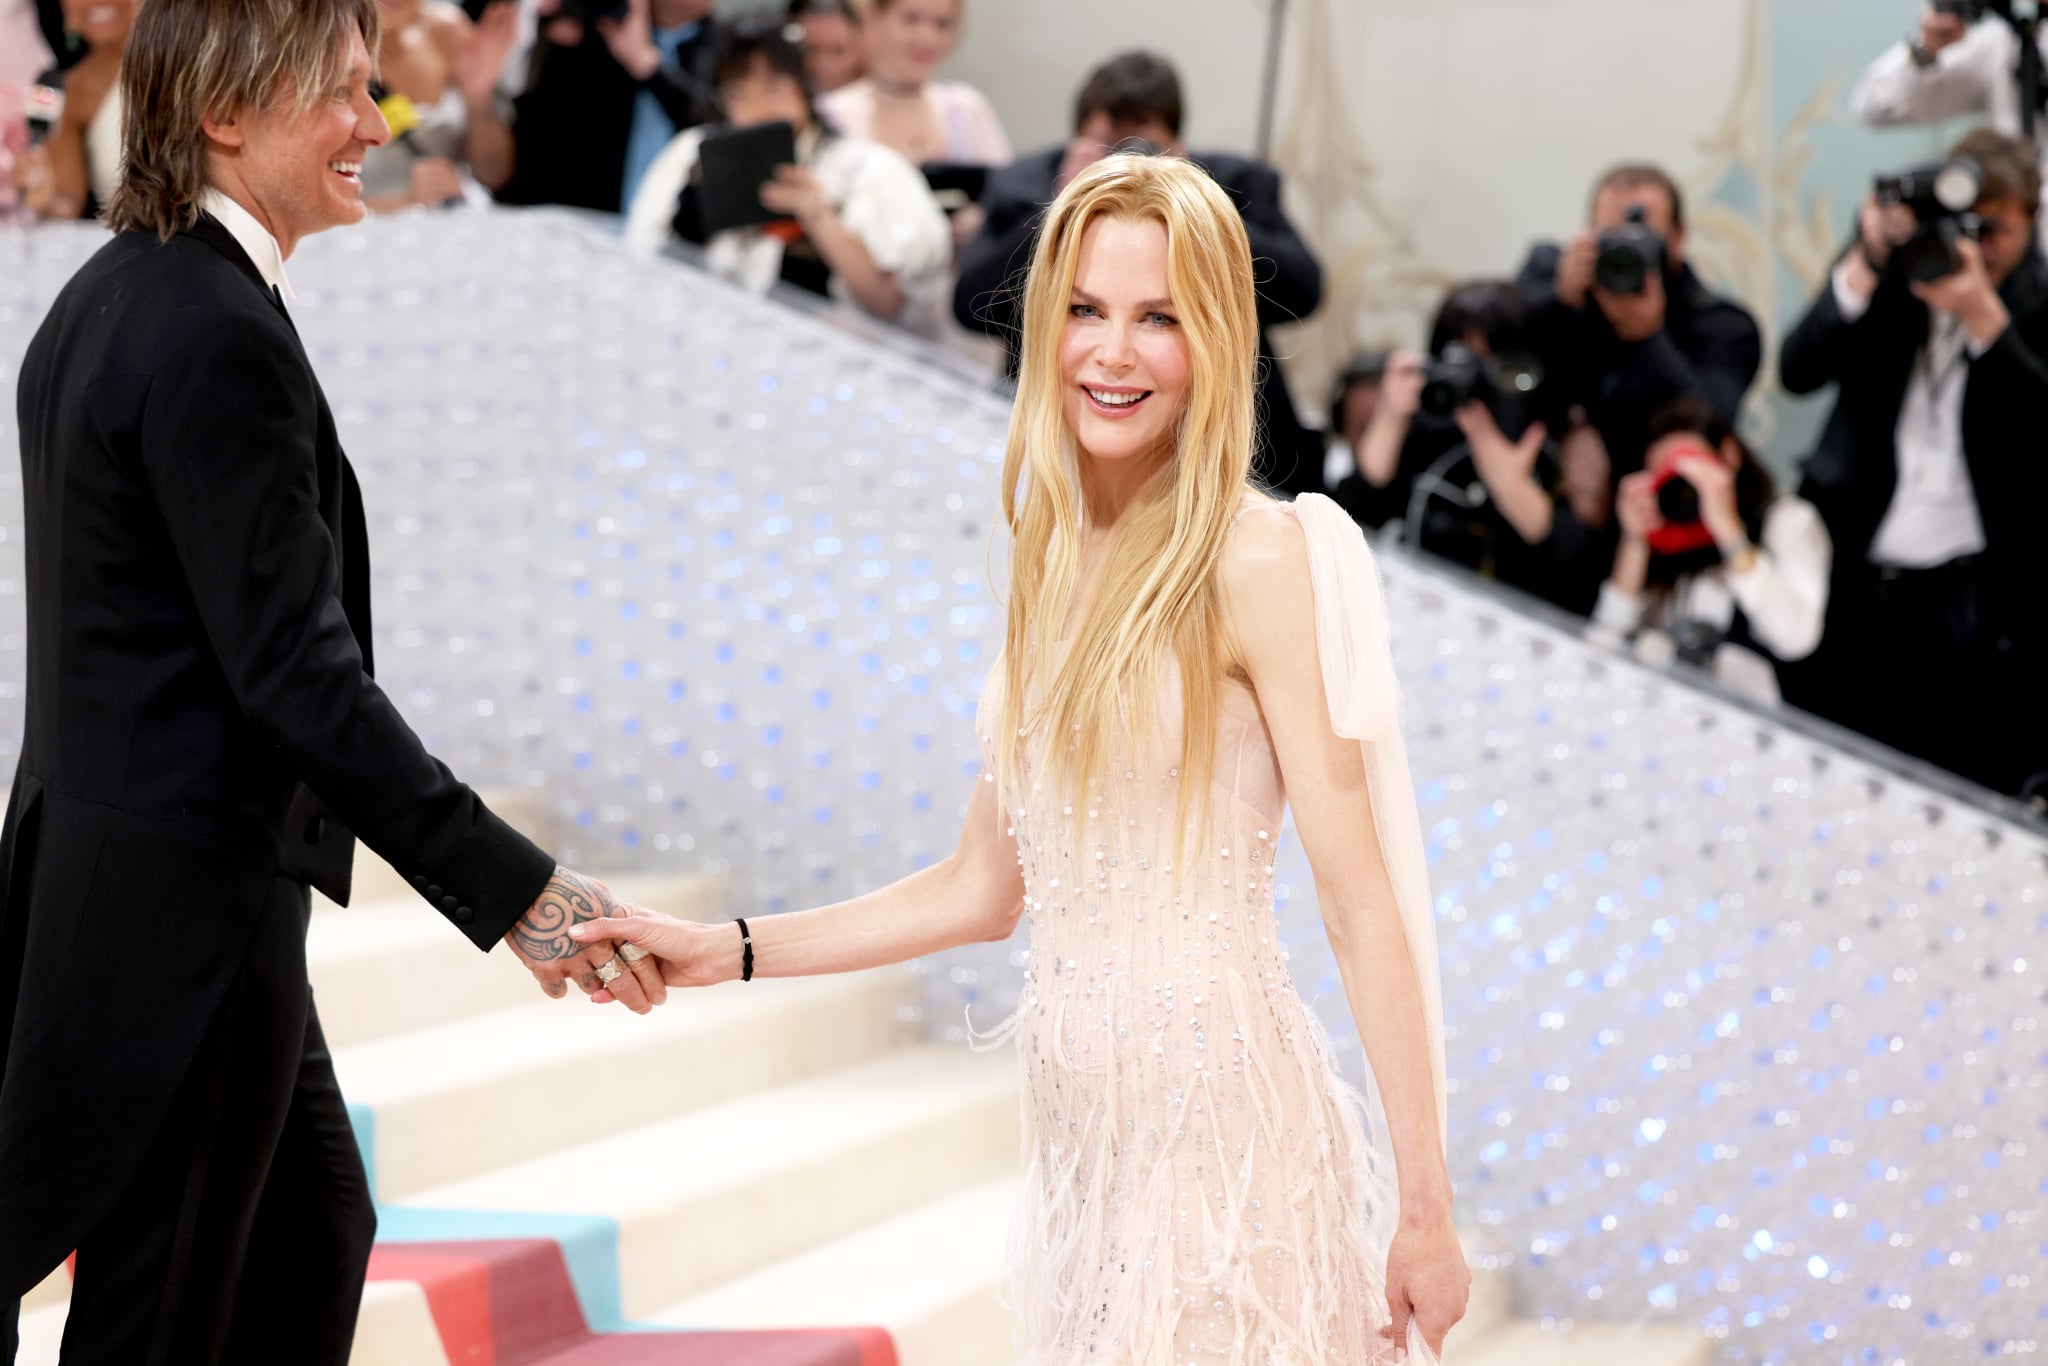 Chanel Tops All Brands at Met Gala With $110.7M in Media Exposure